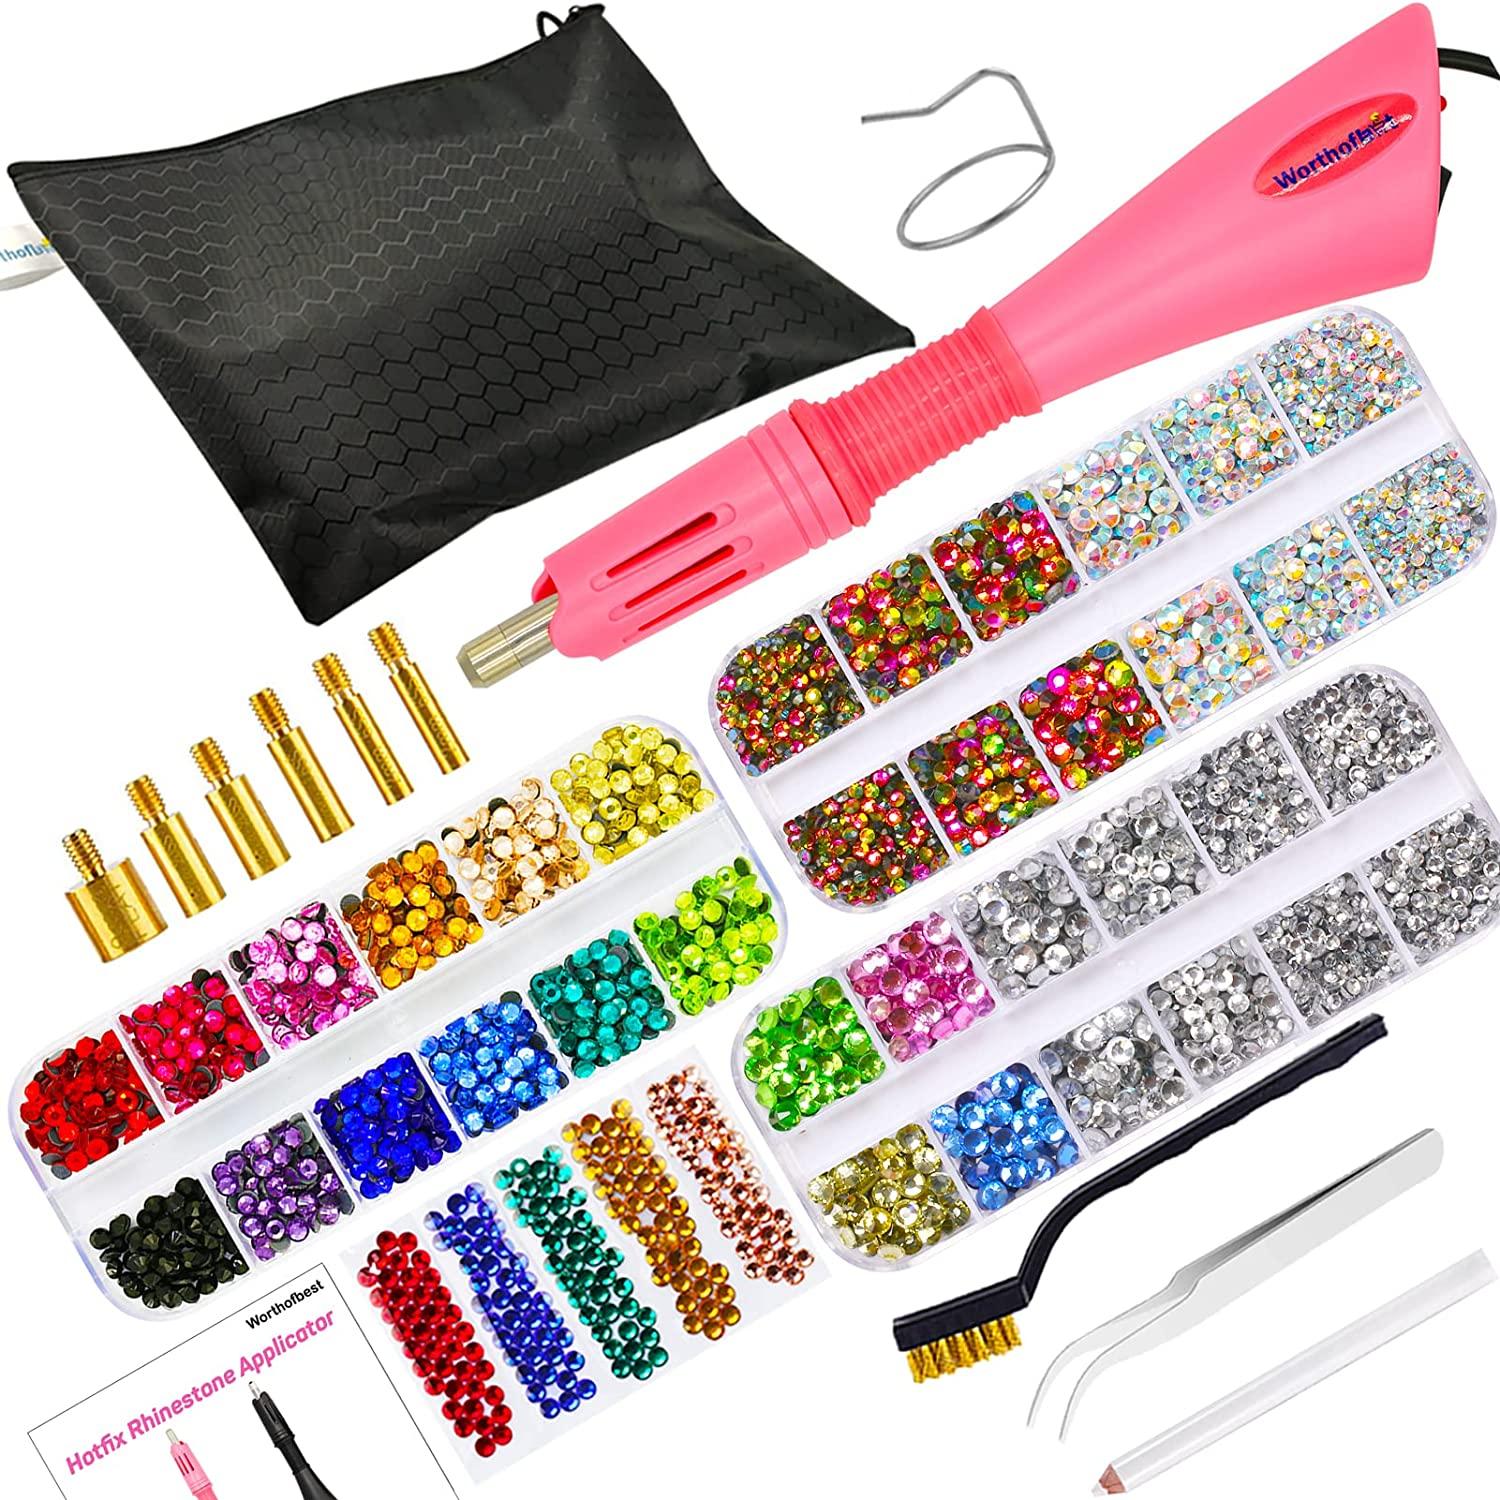 15 Colors Hotfix Rhinestone Applicator Tool, Bedazzler Kit with